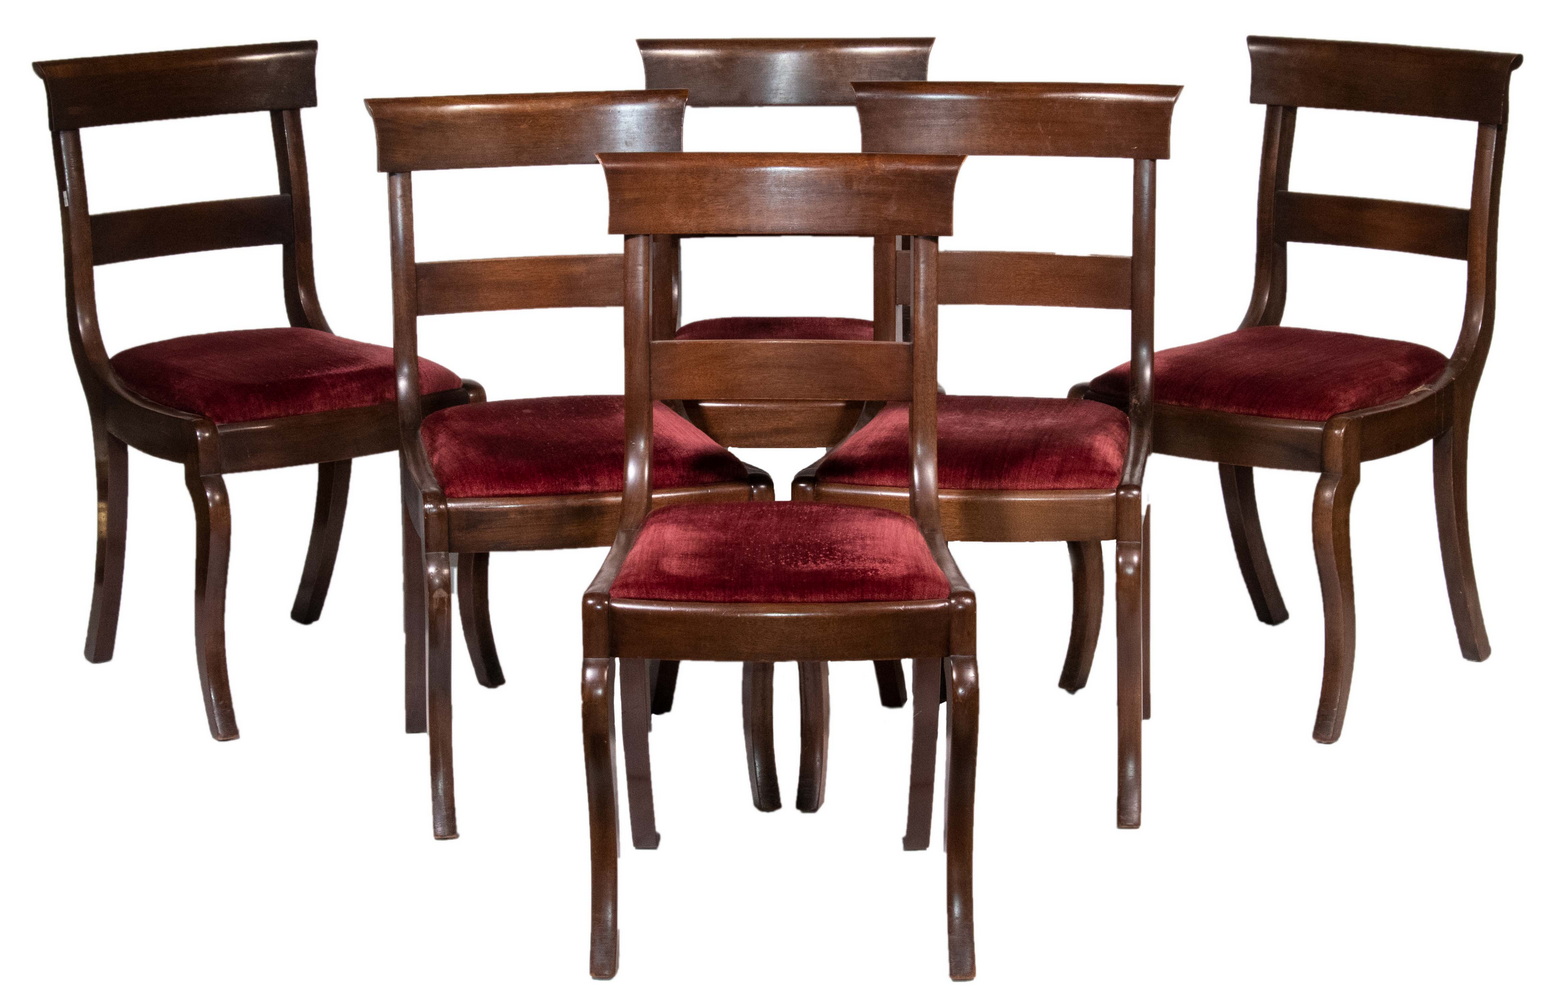  SET OF 6 CLASSICAL DINING CHAIRS 302091